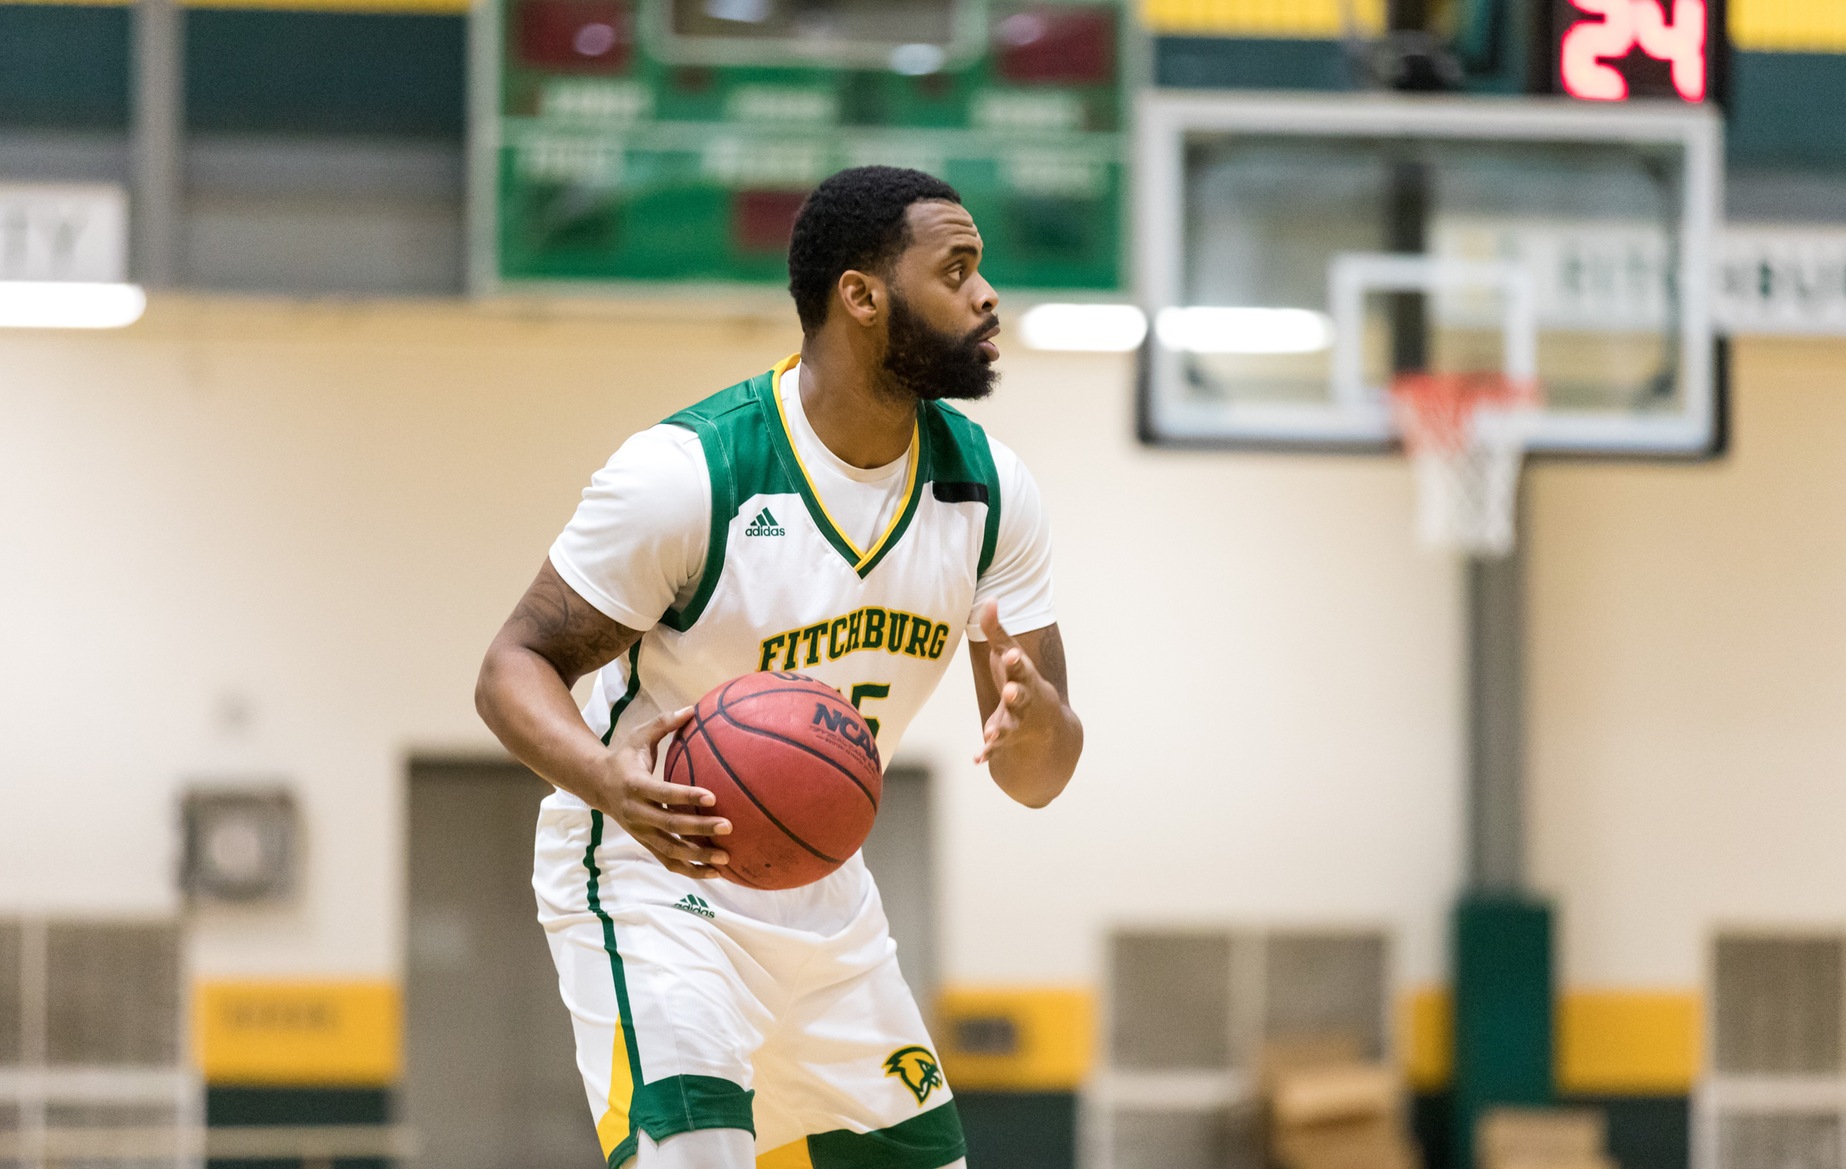 Falcons Roll Past Trailblazers in MASCAC action, 94-73